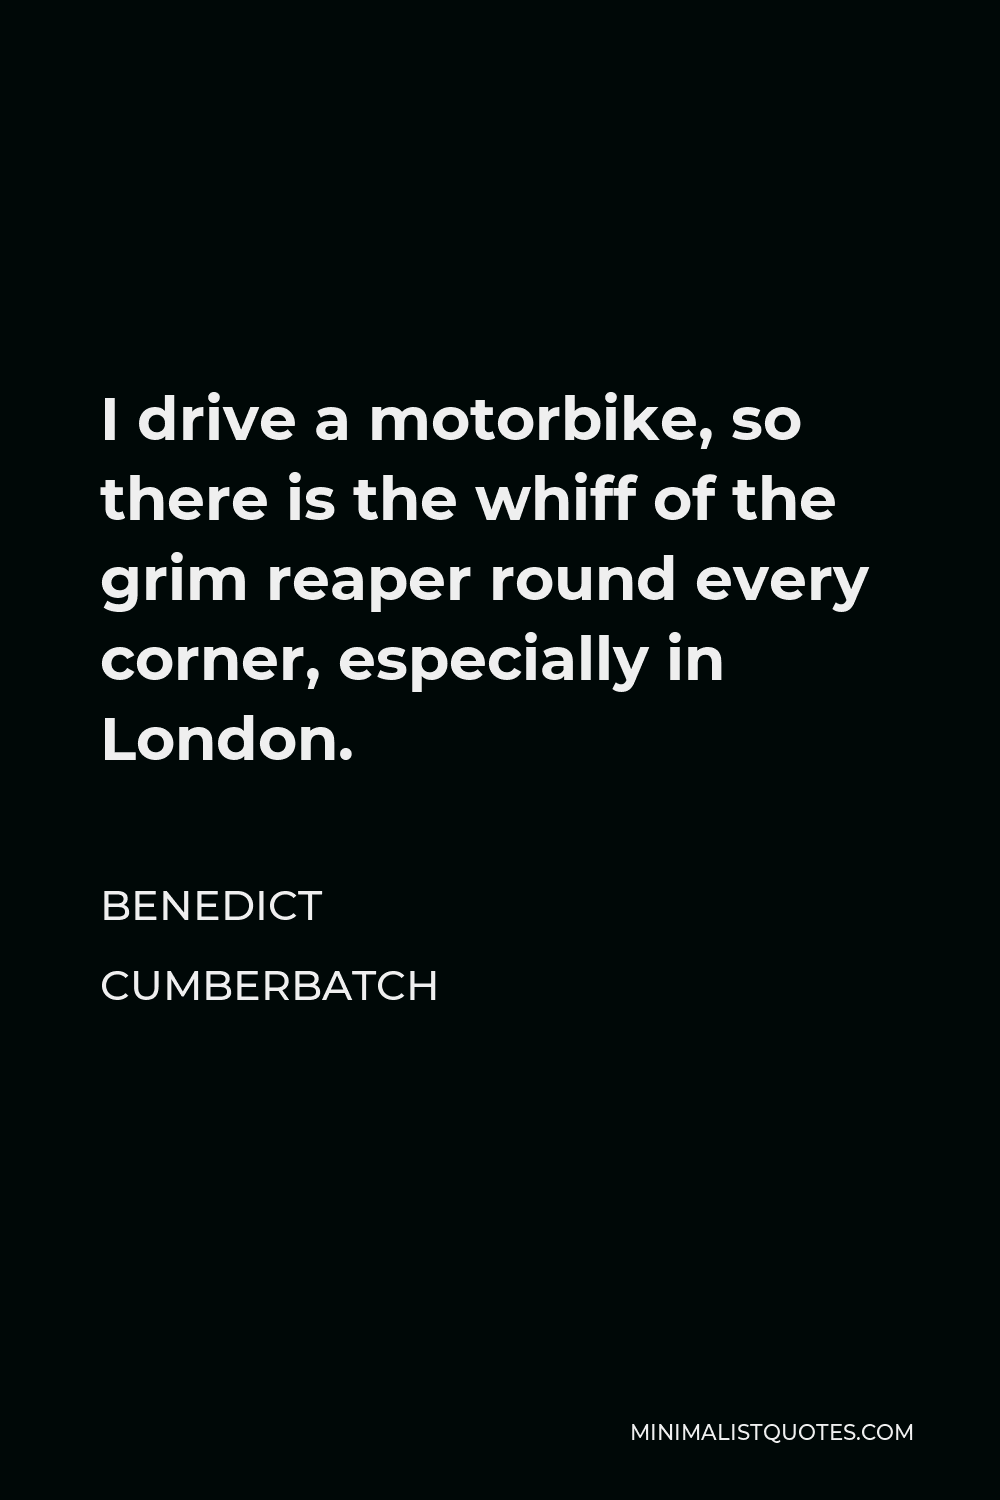 Benedict Cumberbatch Quote - I drive a motorbike, so there is the whiff of the grim reaper round every corner, especially in London.